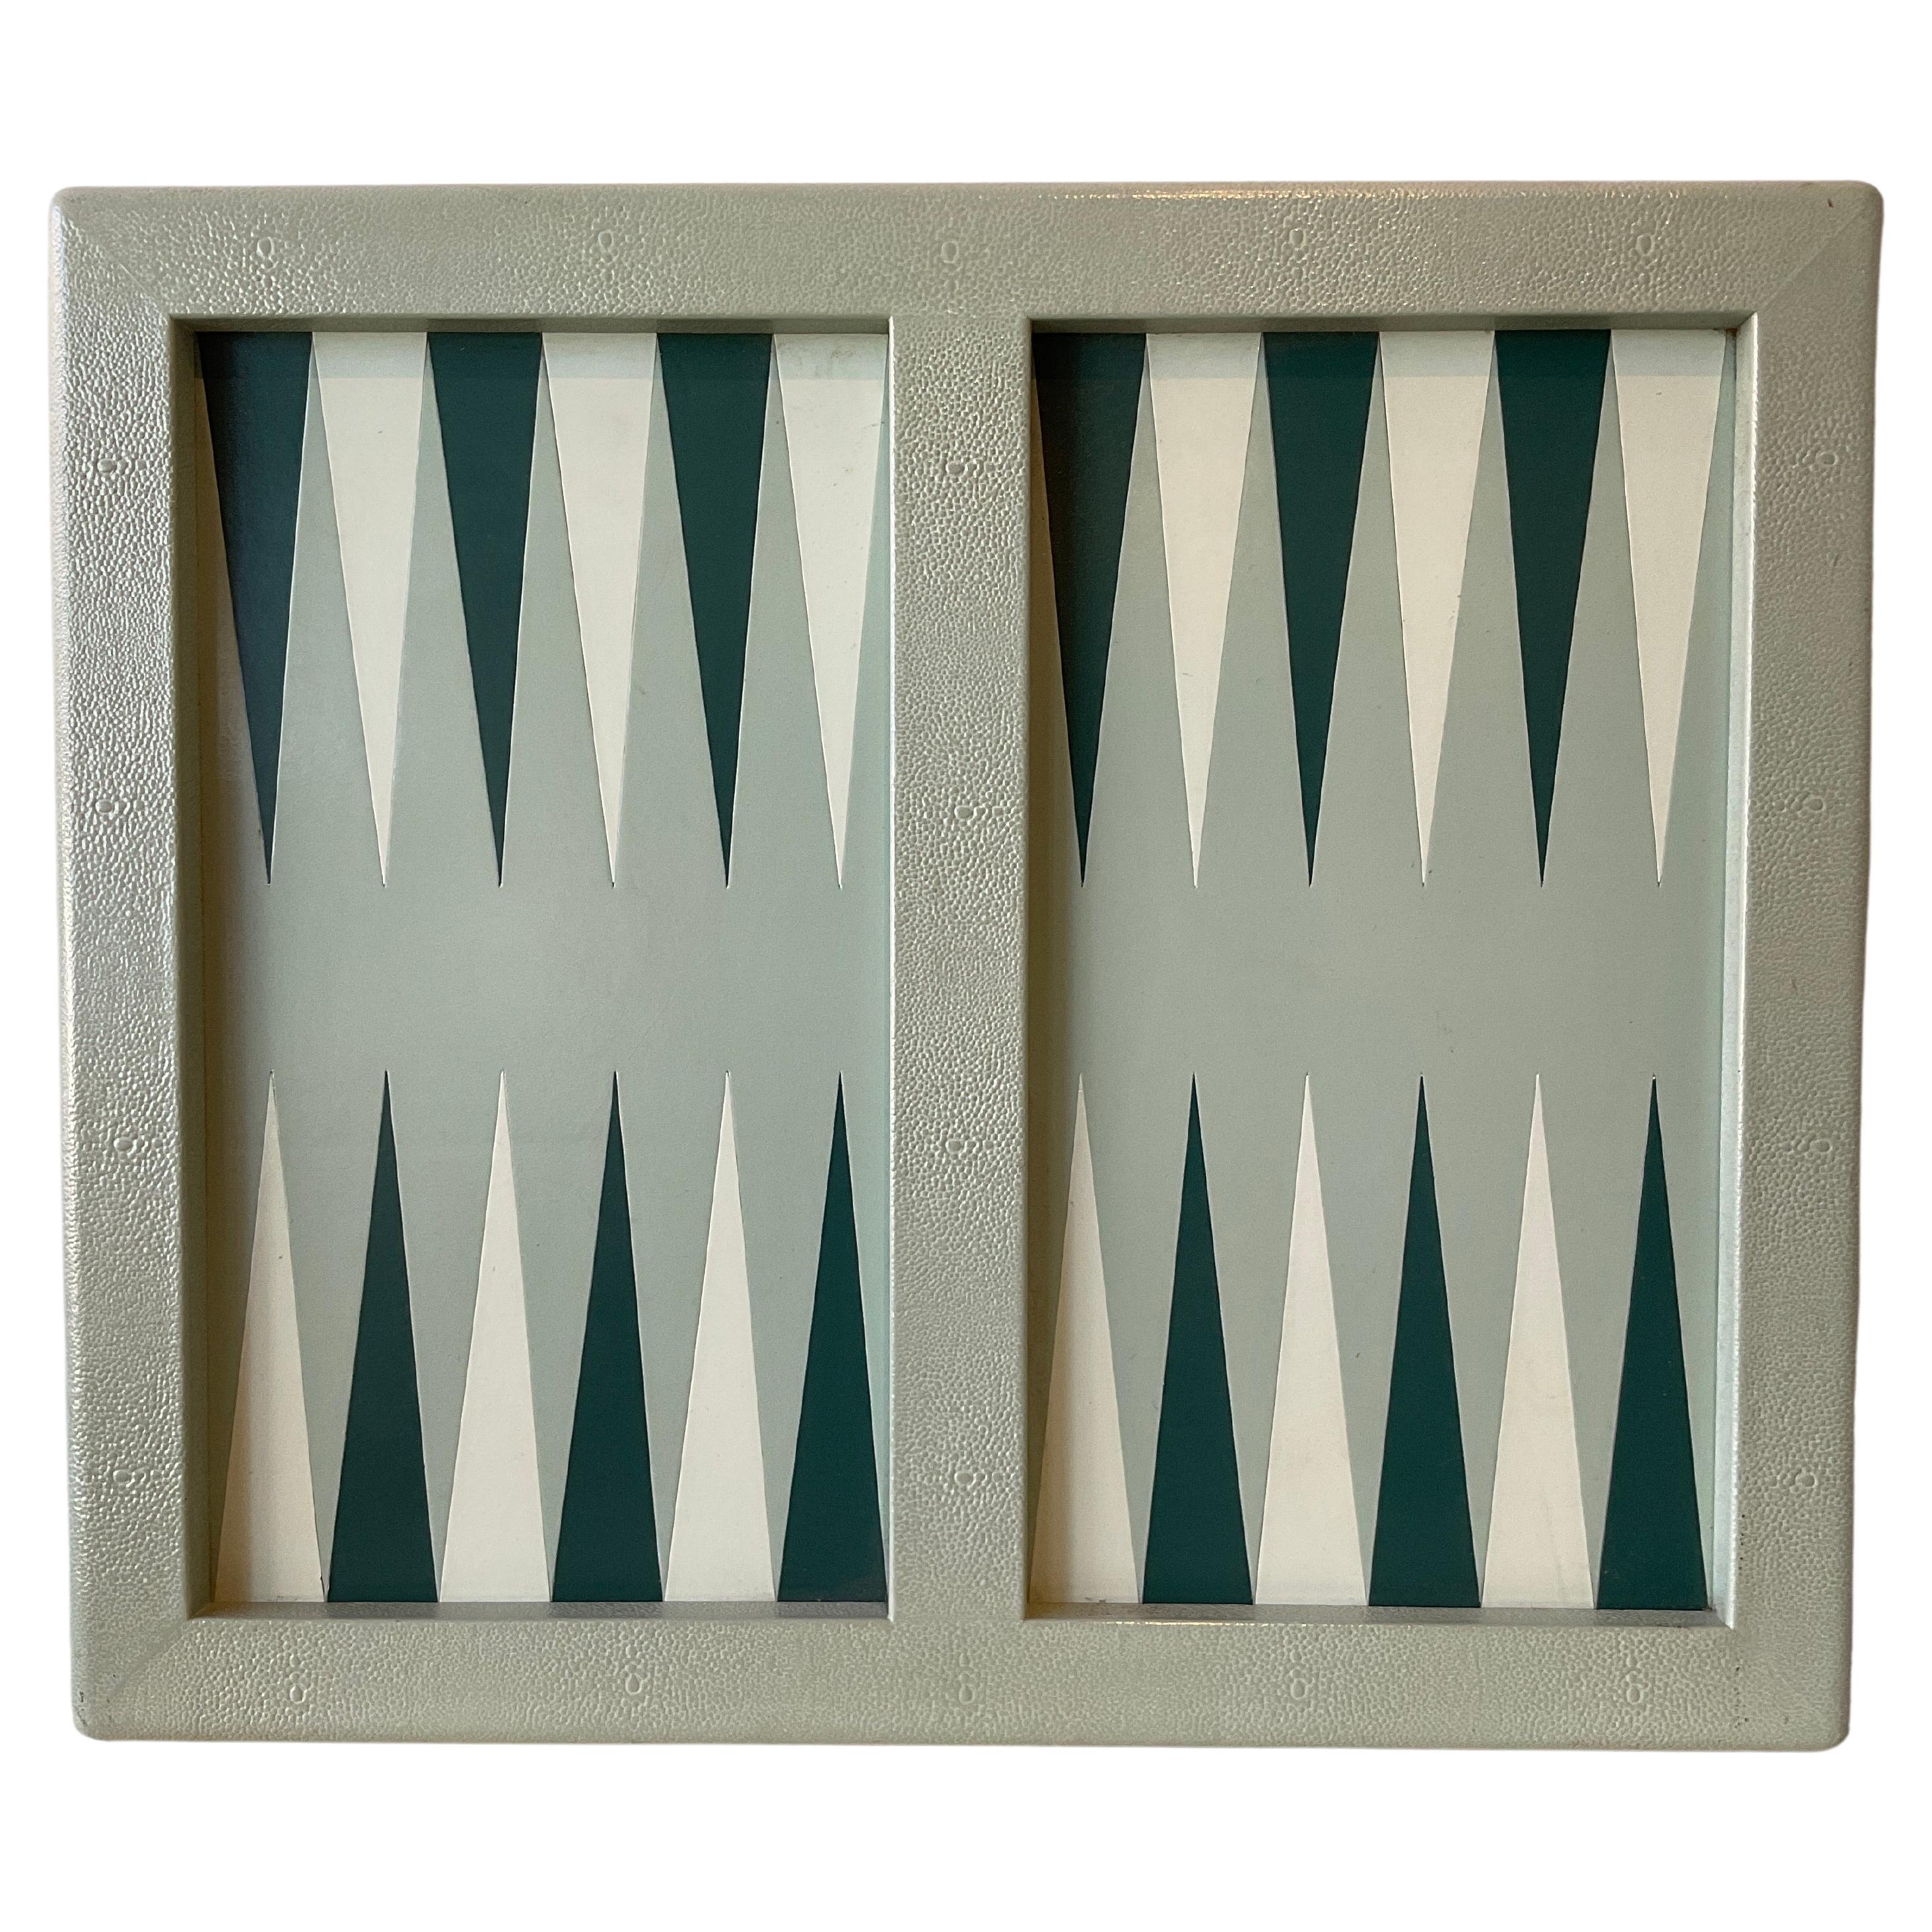 Isabel Mitchell  Green Leather Backgammon Board For Sale